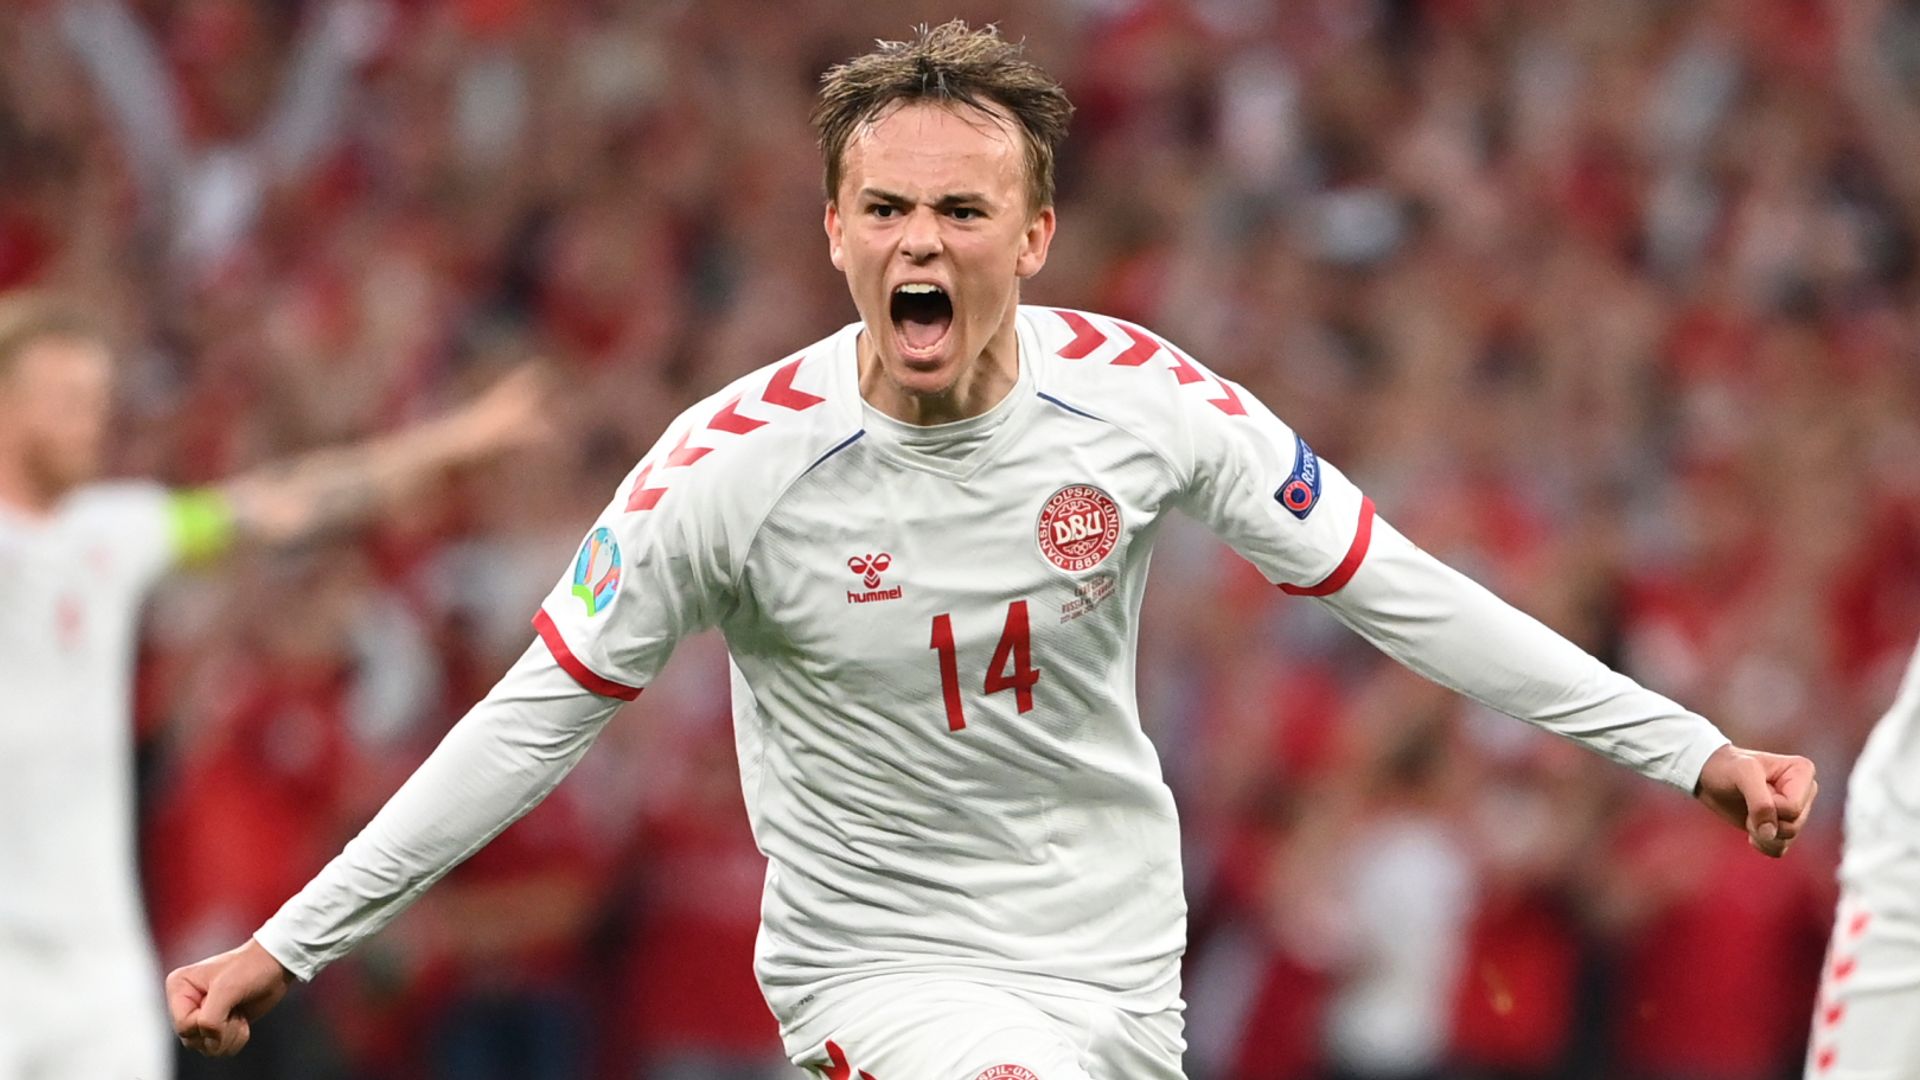 Emotional Denmark thrash Russia to face Wales in last 16